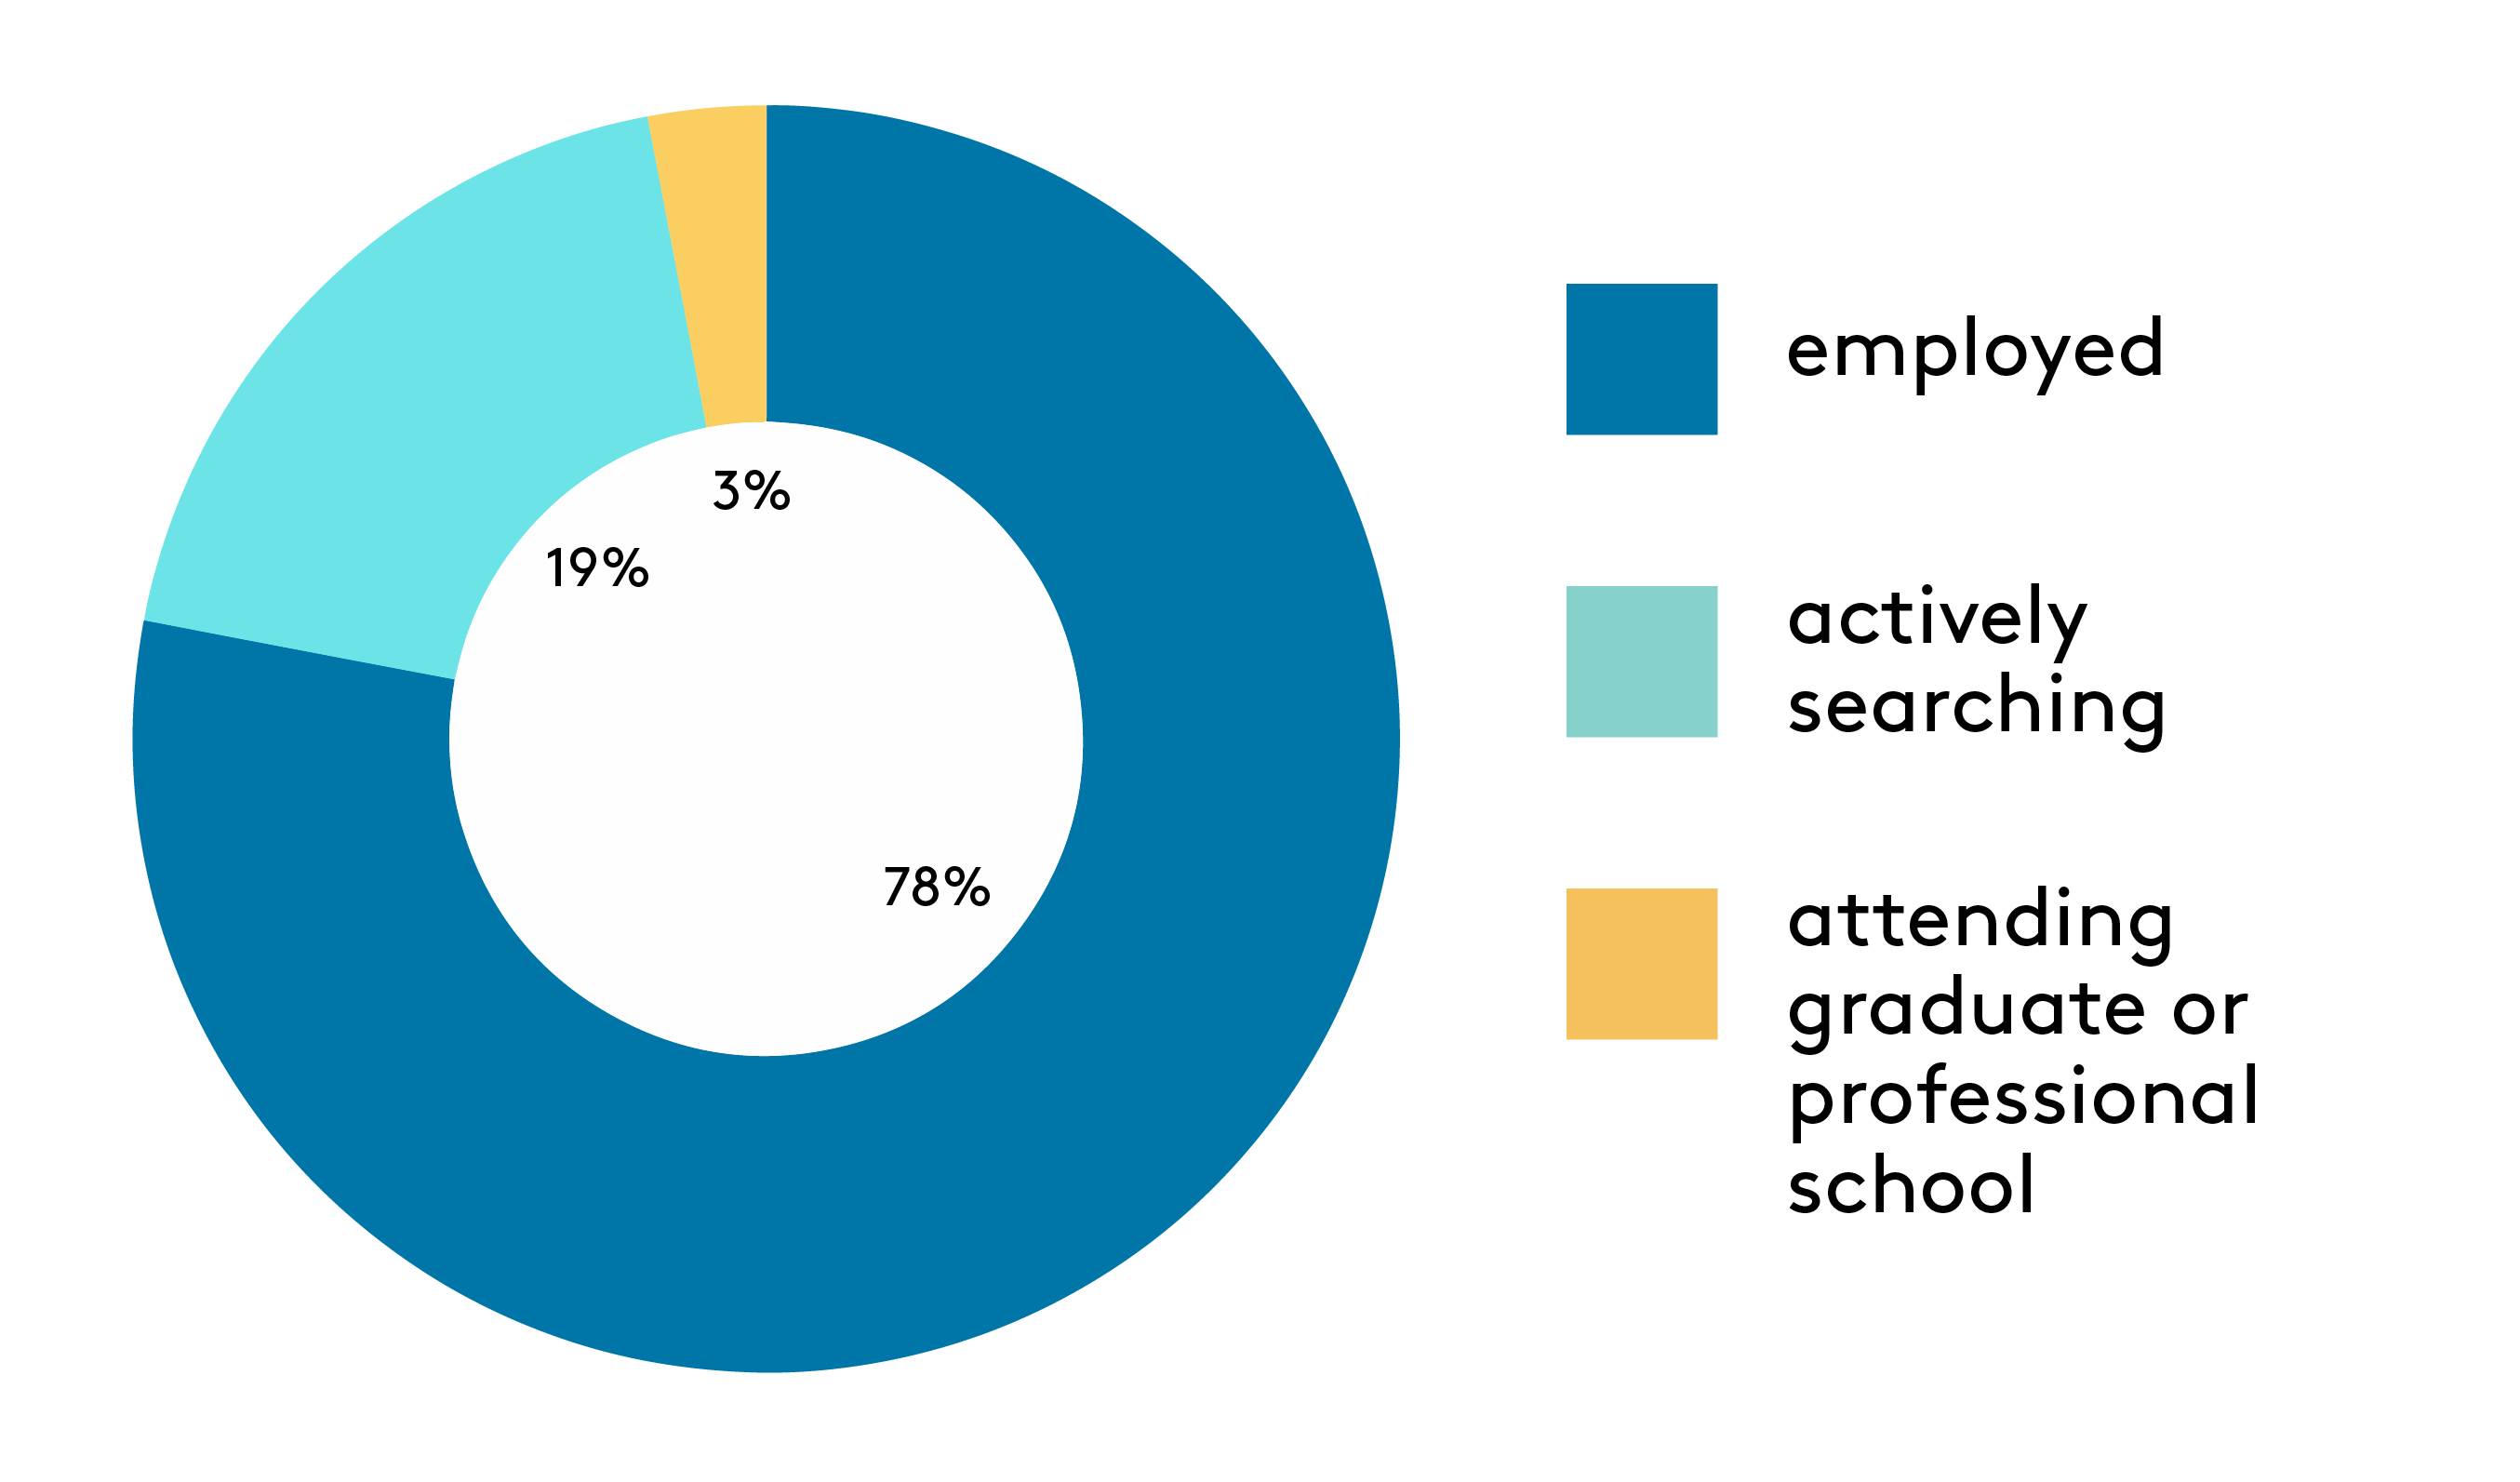 78% employed; 19% actively searching; 3% continuing education